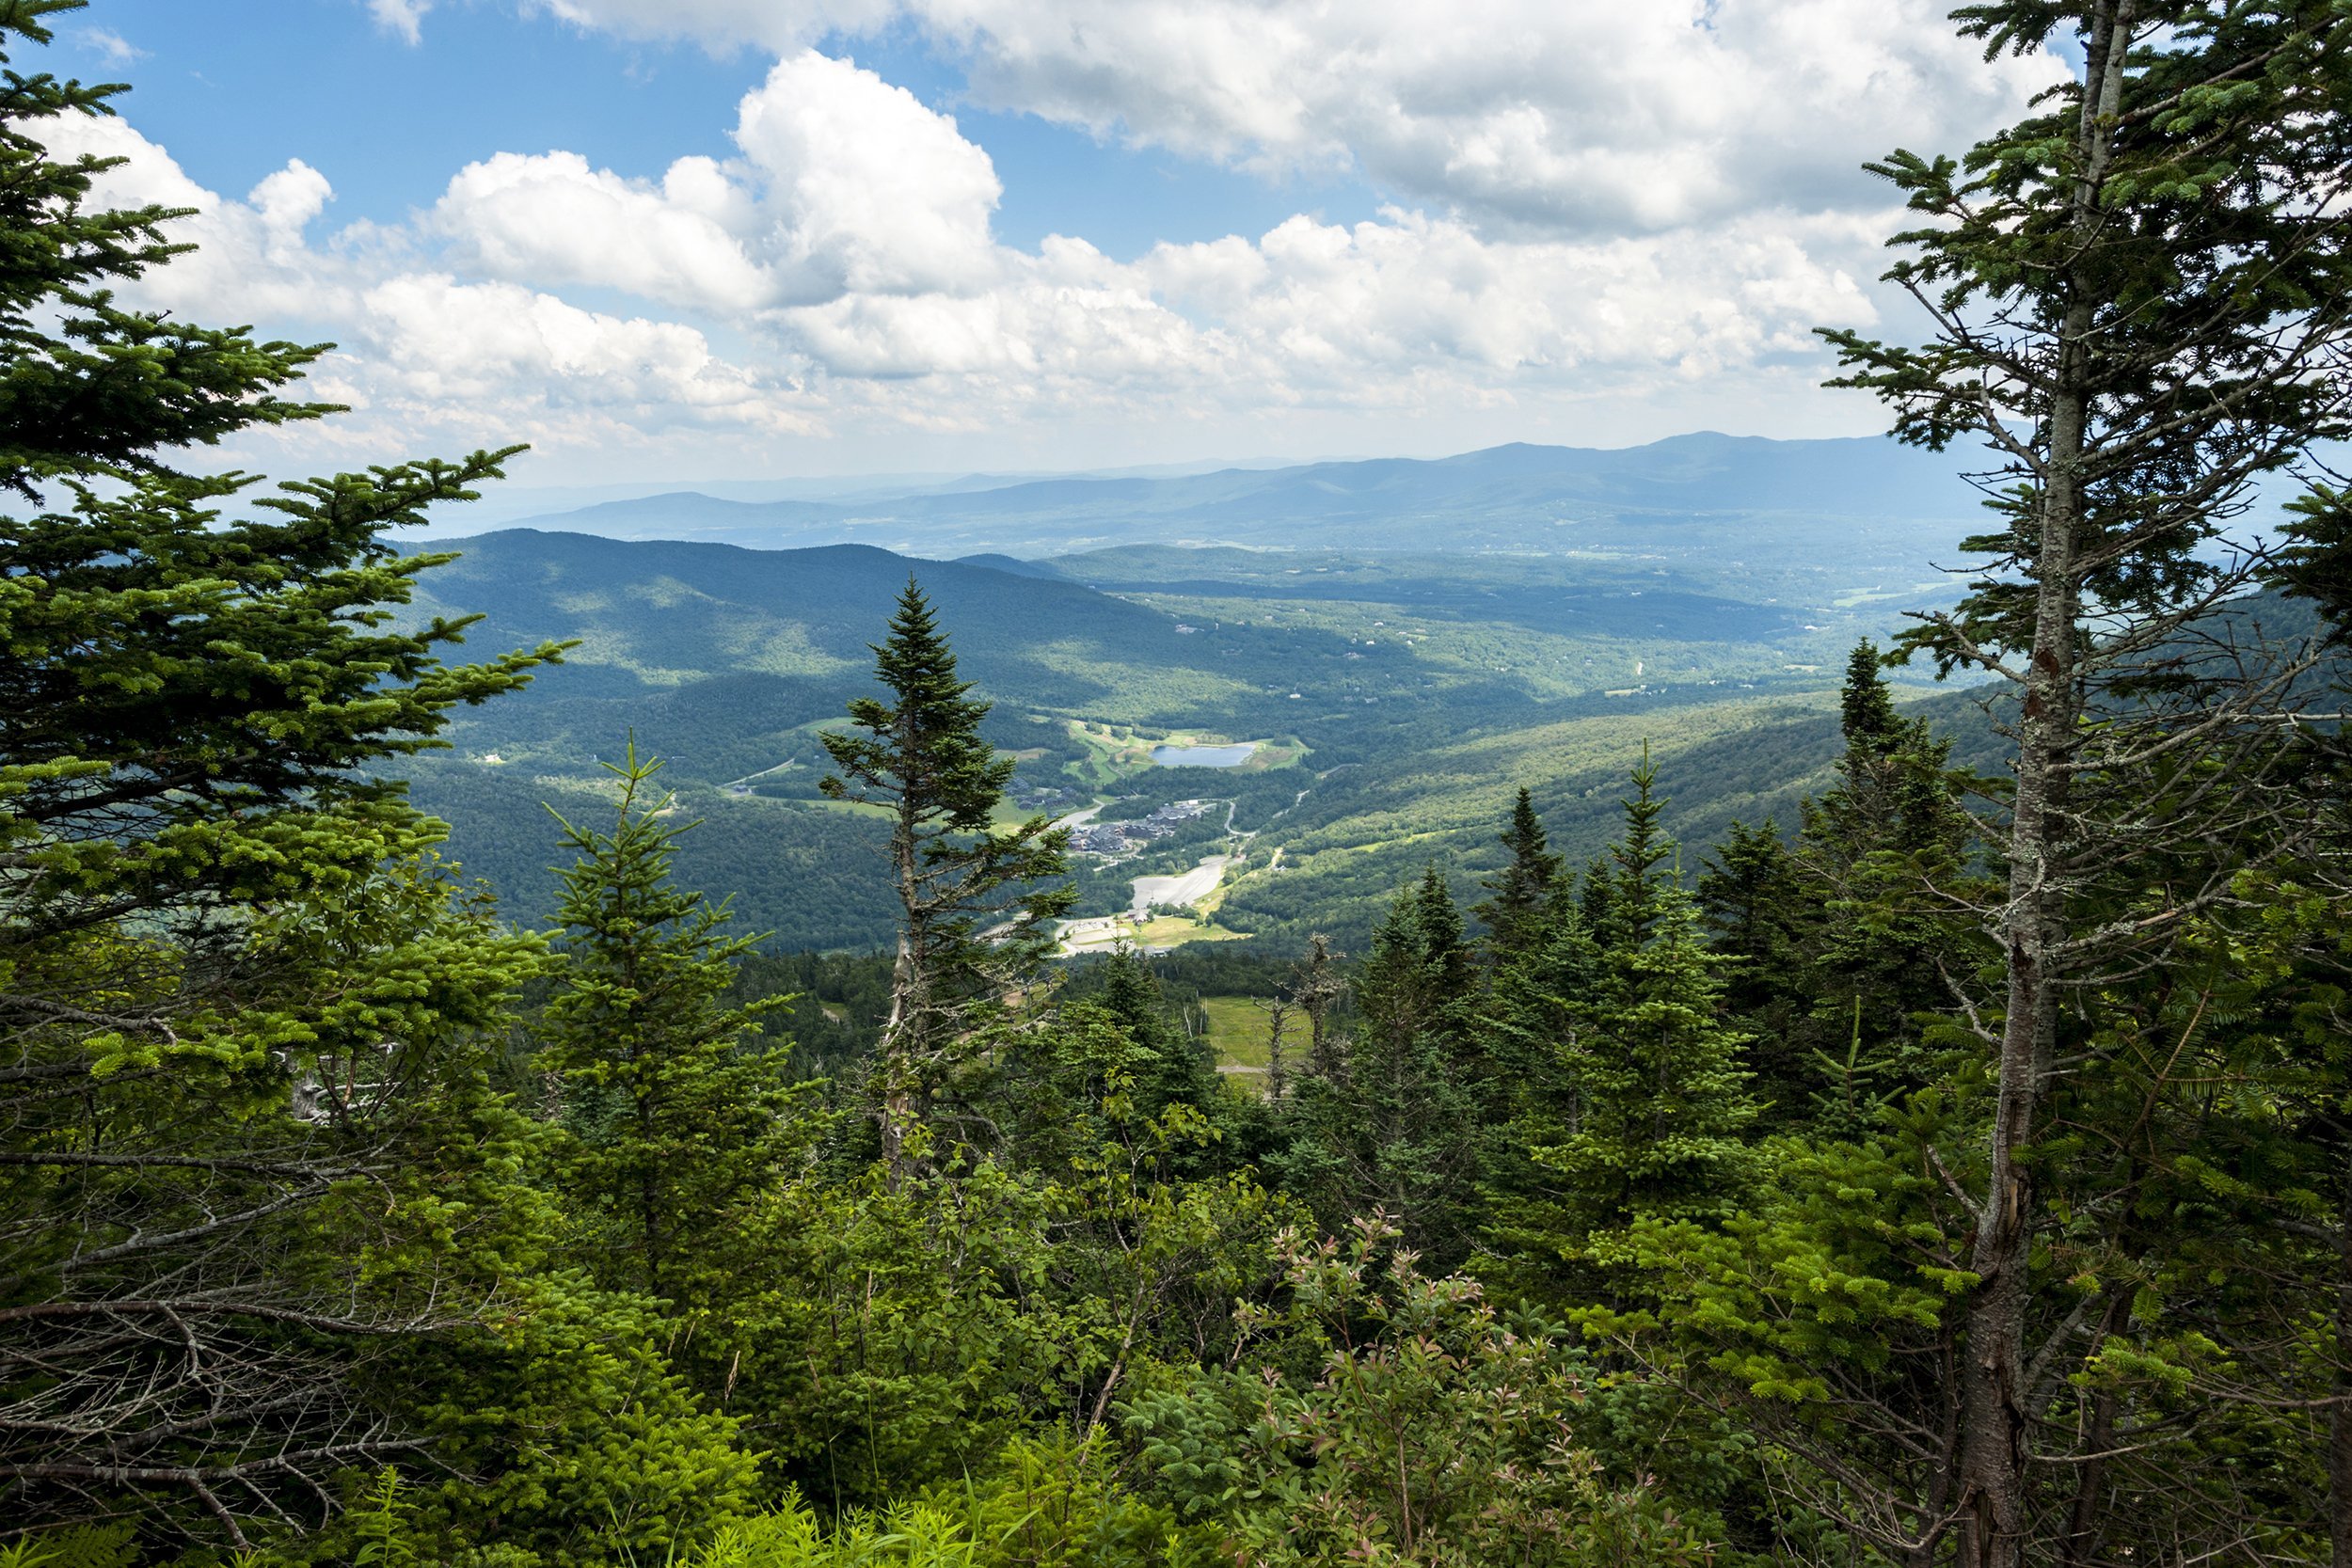 <p>In its 200 miles, the Green Mountain Byway cuts straight through the center of Vermont, affording visitors a convenient route through the state's lush farmland and many of its best communities for tourists, including Stowe, Wilmington, and Granville. In terms of iconic New England scenery, this route is difficult to beat.</p>